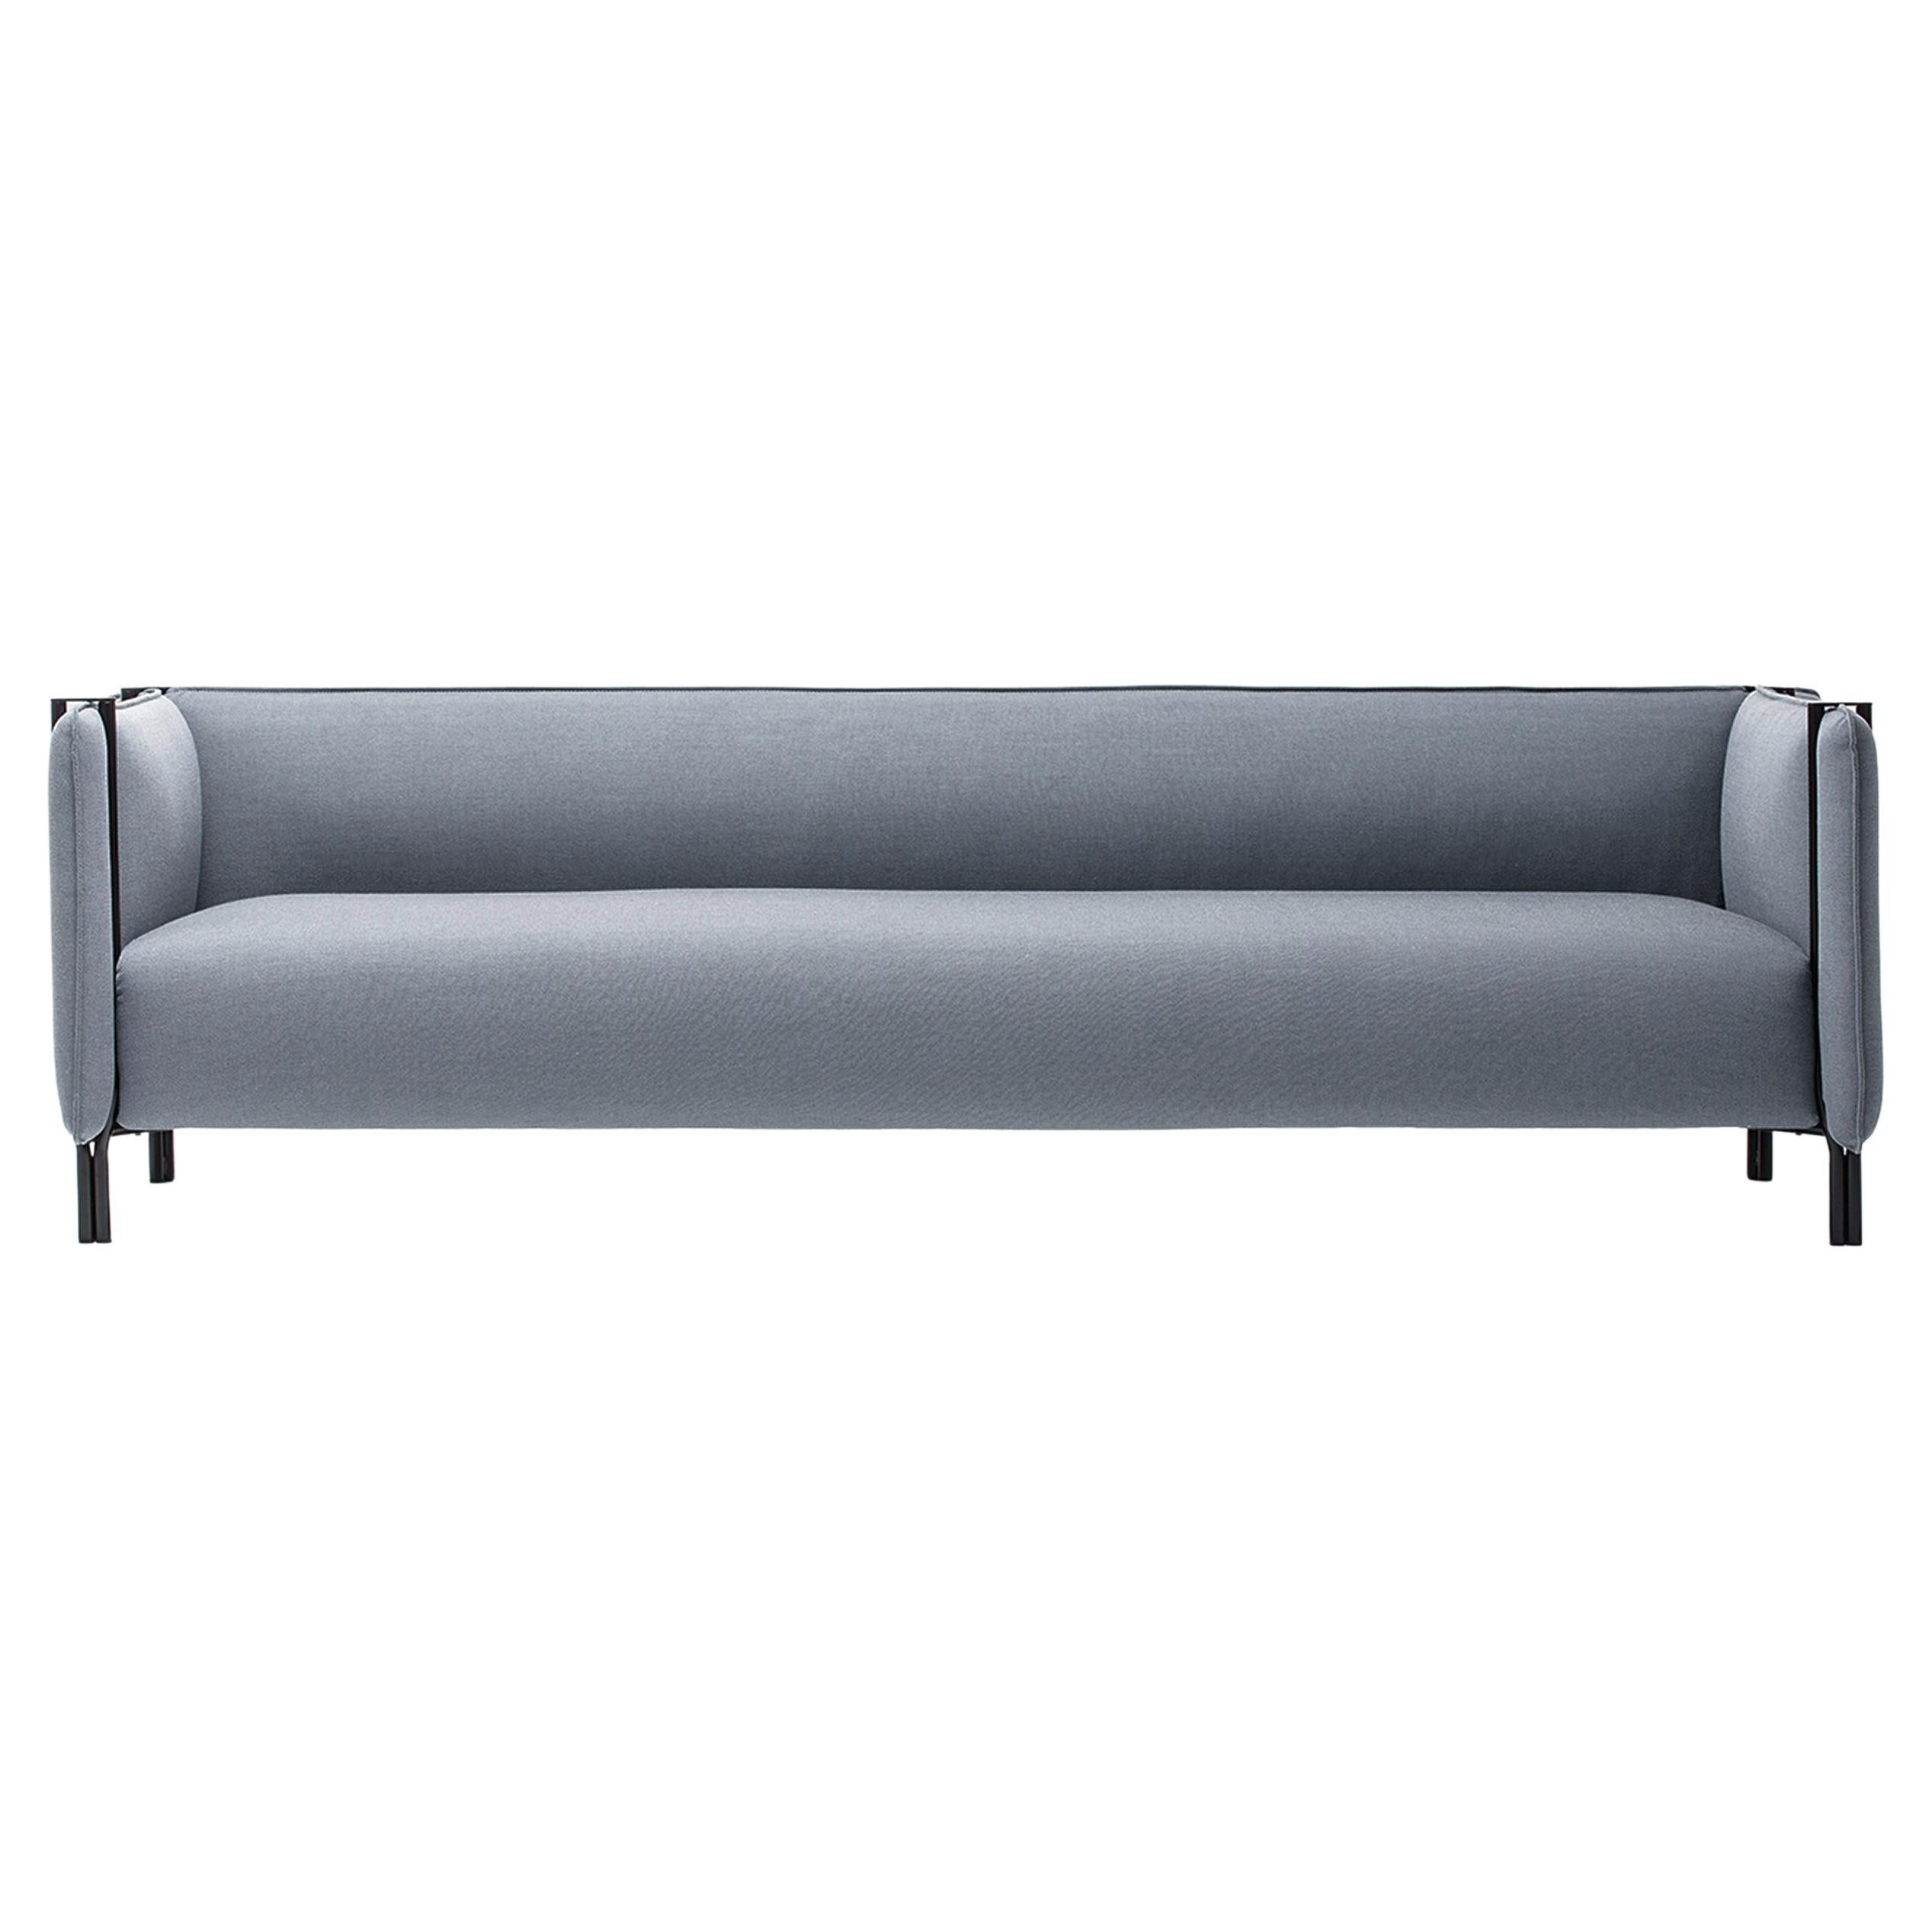 Pinch Large 3 Seater Sofa in Comfort Upholstery with Black Base by Skrivo Design For Sale